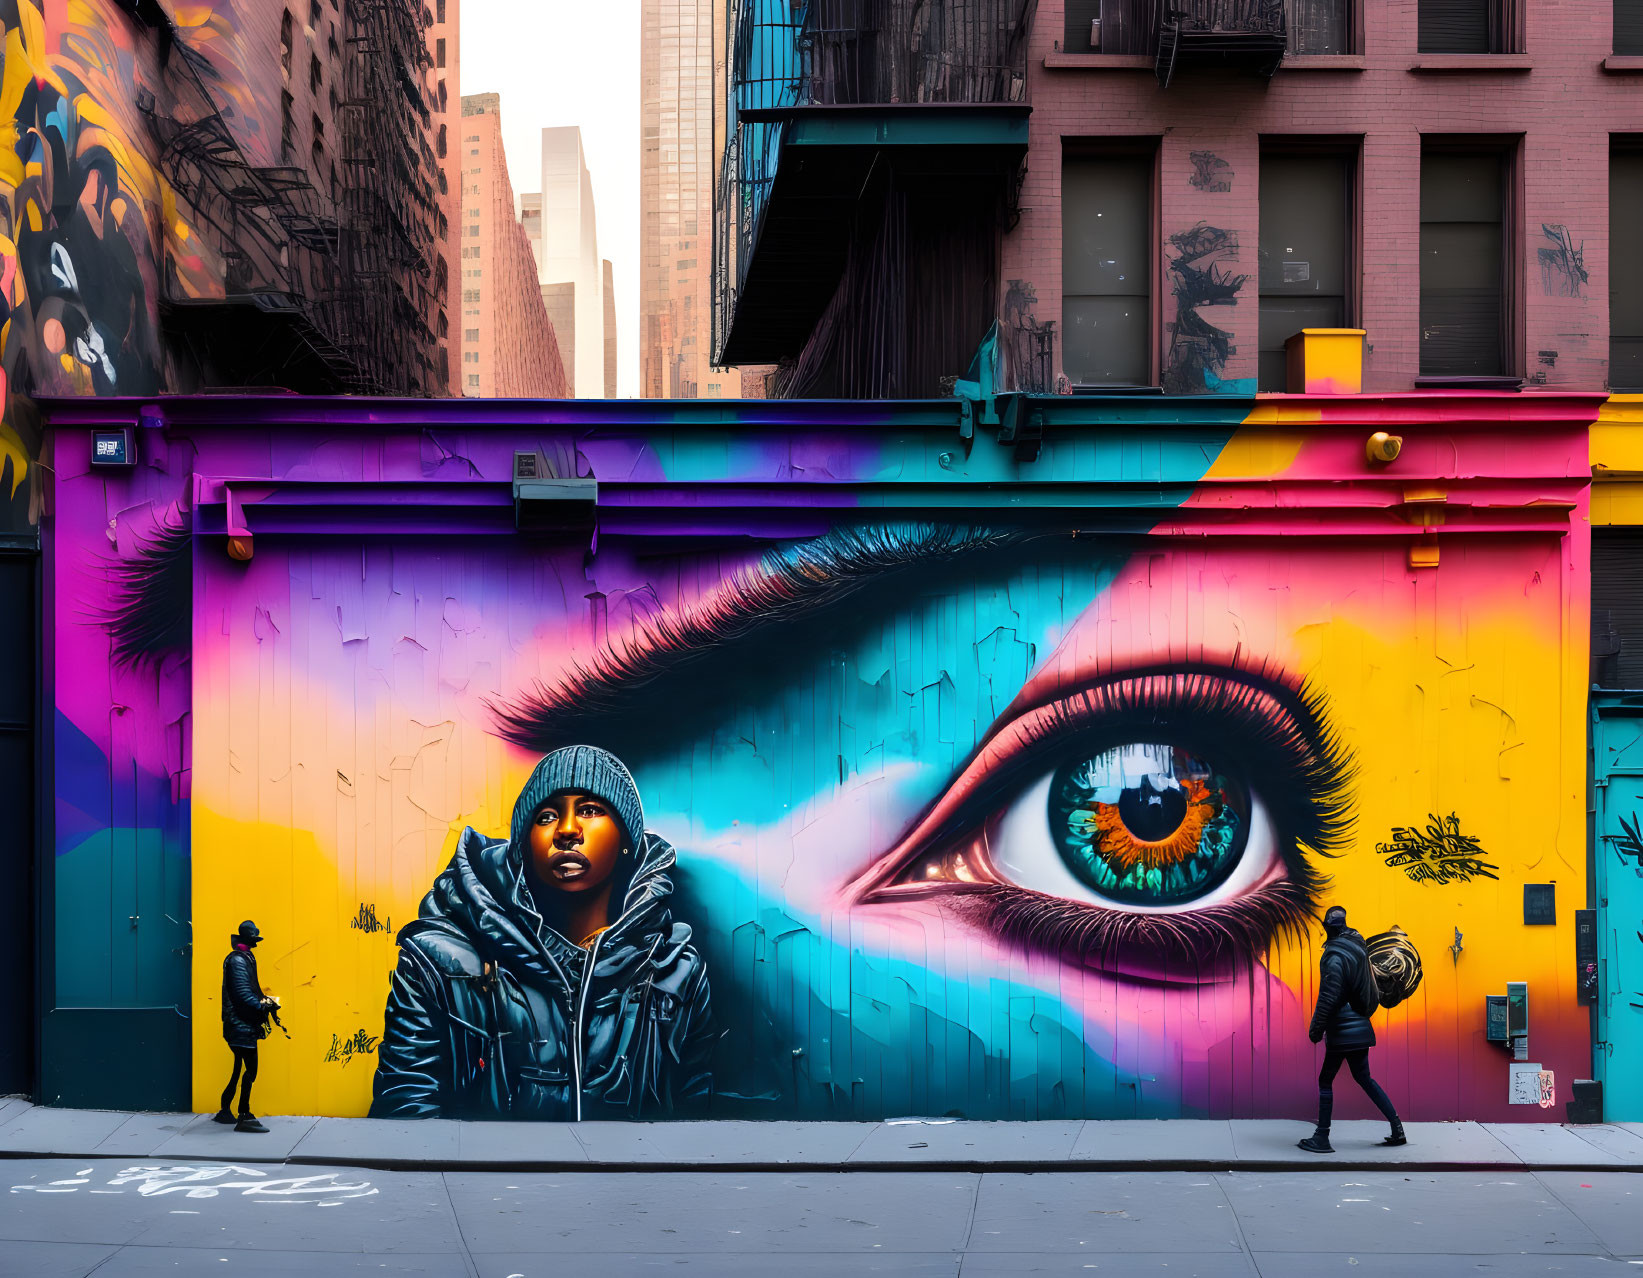 Colorful street mural featuring large eye and face amidst cityscape.